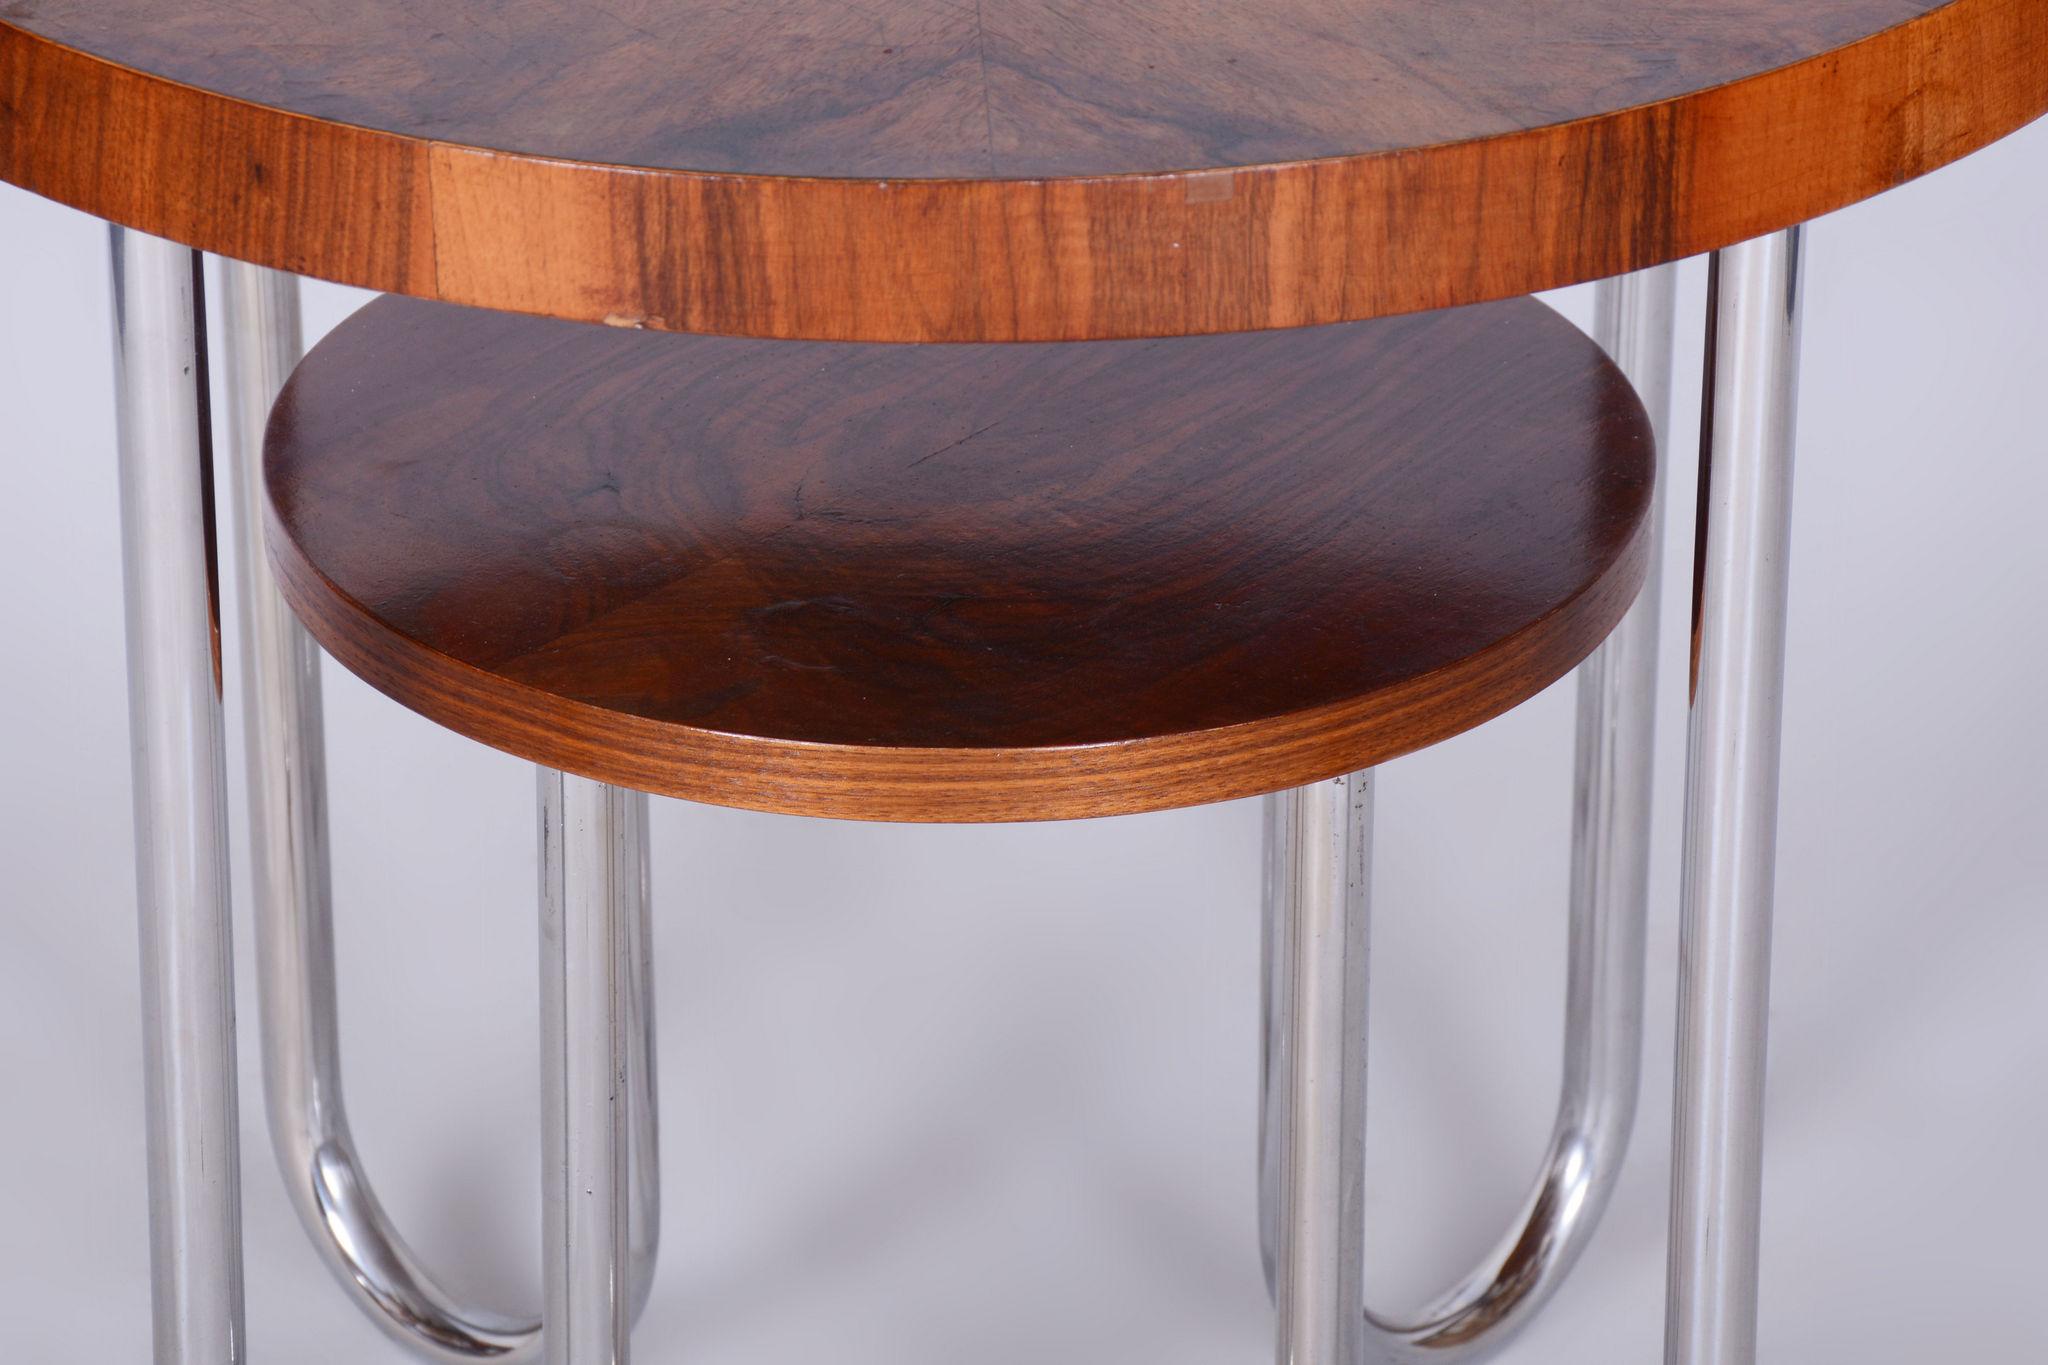 Restored Bauhaus Round Table, by Robert Slezák, Spruce, Walnut, Czech, 1930s In Good Condition For Sale In Horomerice, CZ